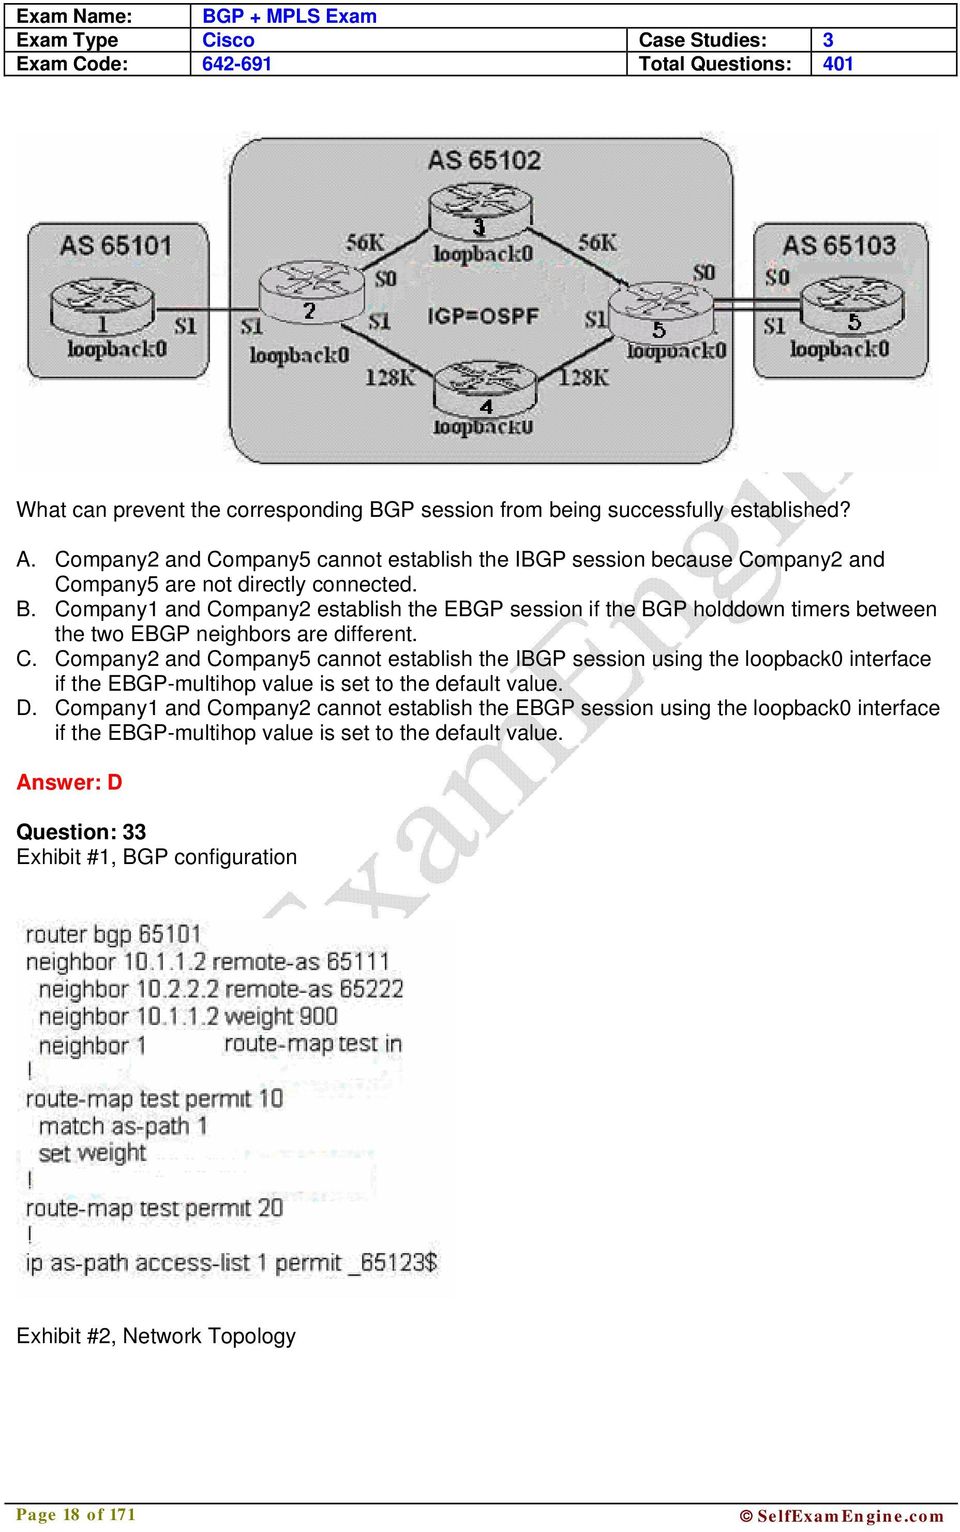 Company1 and Company2 establish the EBGP session if the BGP holddown timers between the two EBGP neighbors are different. C. Company2 and Company5 cannot establish the IBGP session using the loopback0 interface if the EBGP-multihop value is set to the default value.